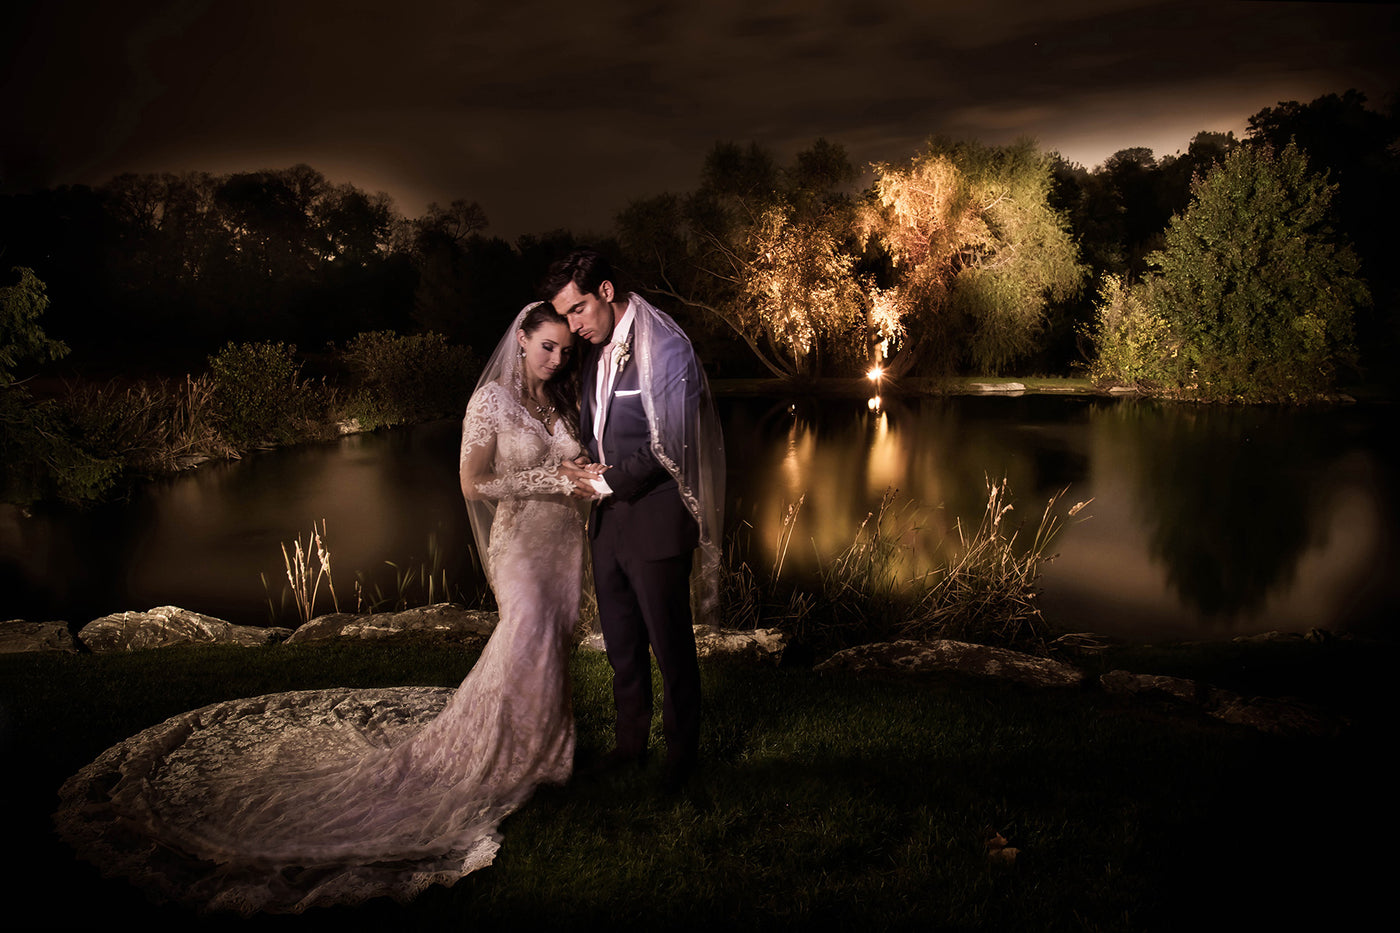 Flash vs. Continuous Light with Cliff Mautner, SanDisk & StellaPro Light | Samy's PhotoSchool